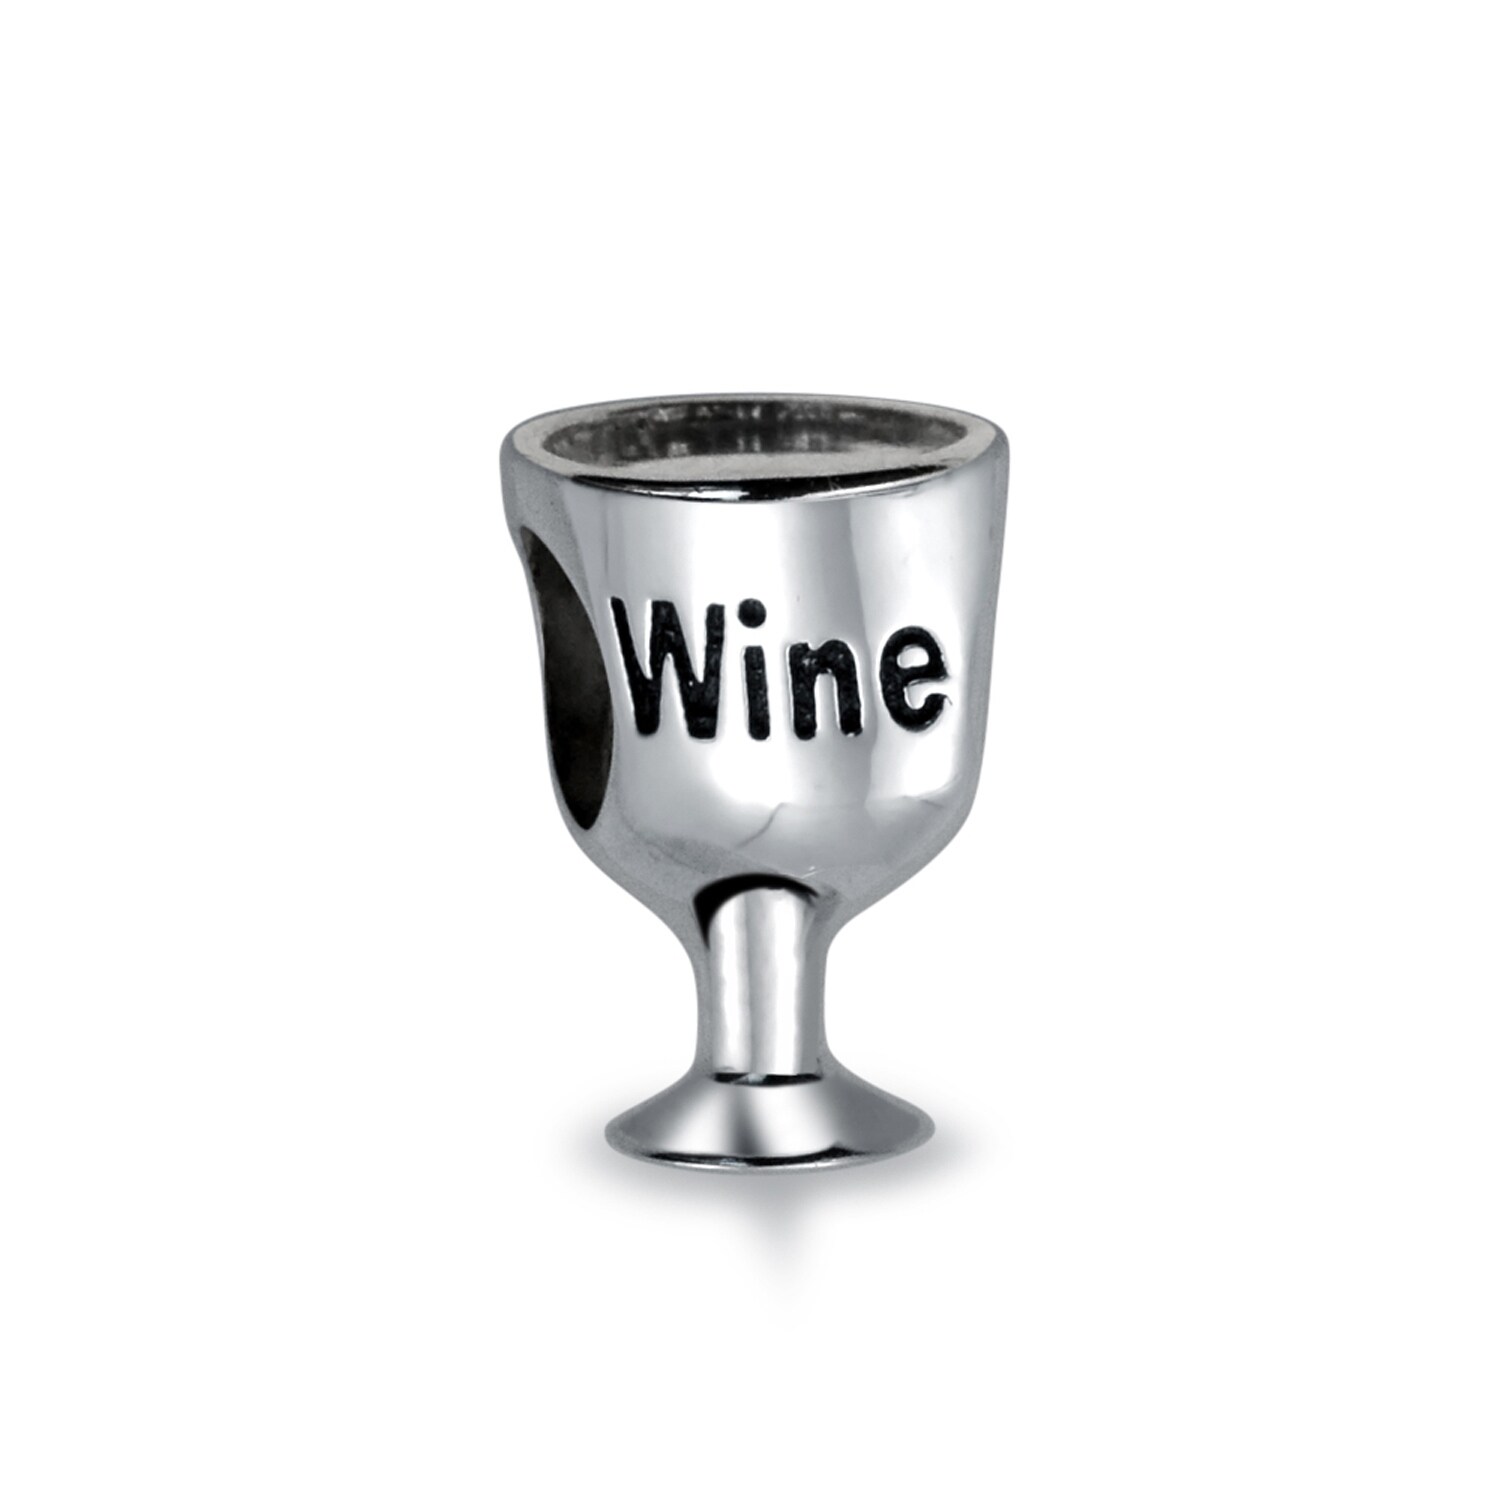 wine glass cup lover char bead for Bracelets-European I Love red wine